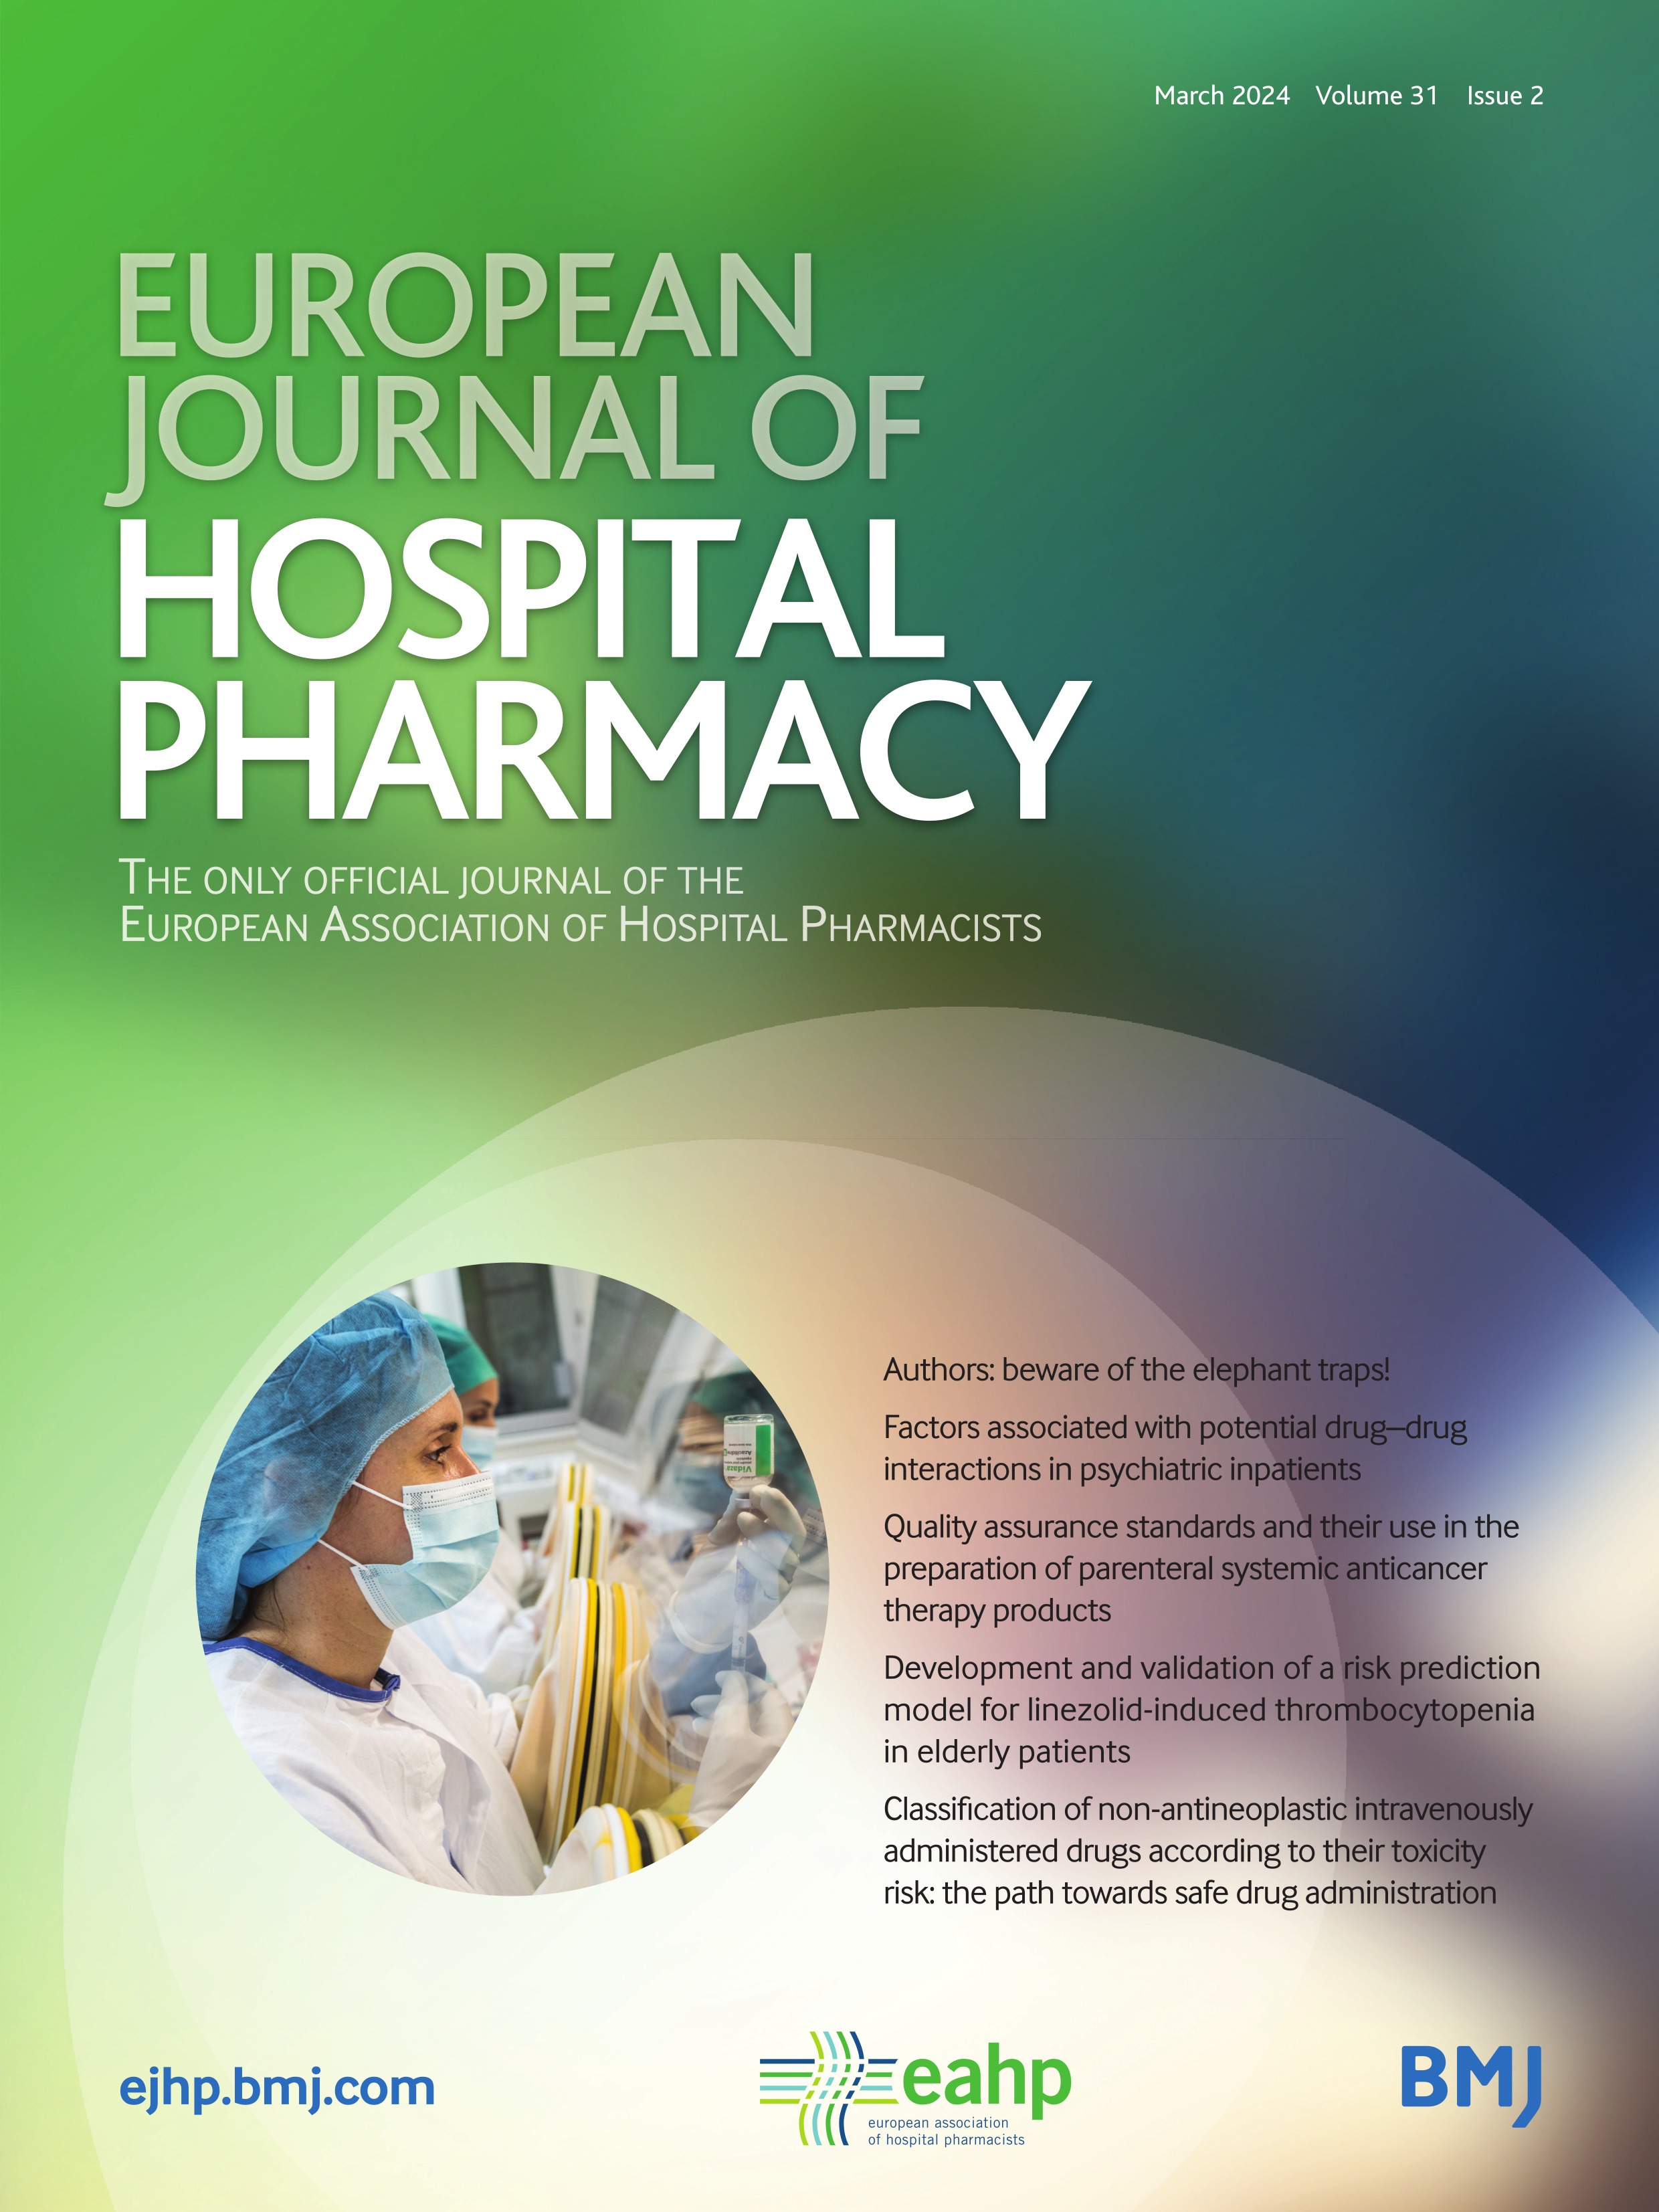 Development and implementation of medication-related clinical rules for obstetrics, gynaecology, and paediatric outpatients